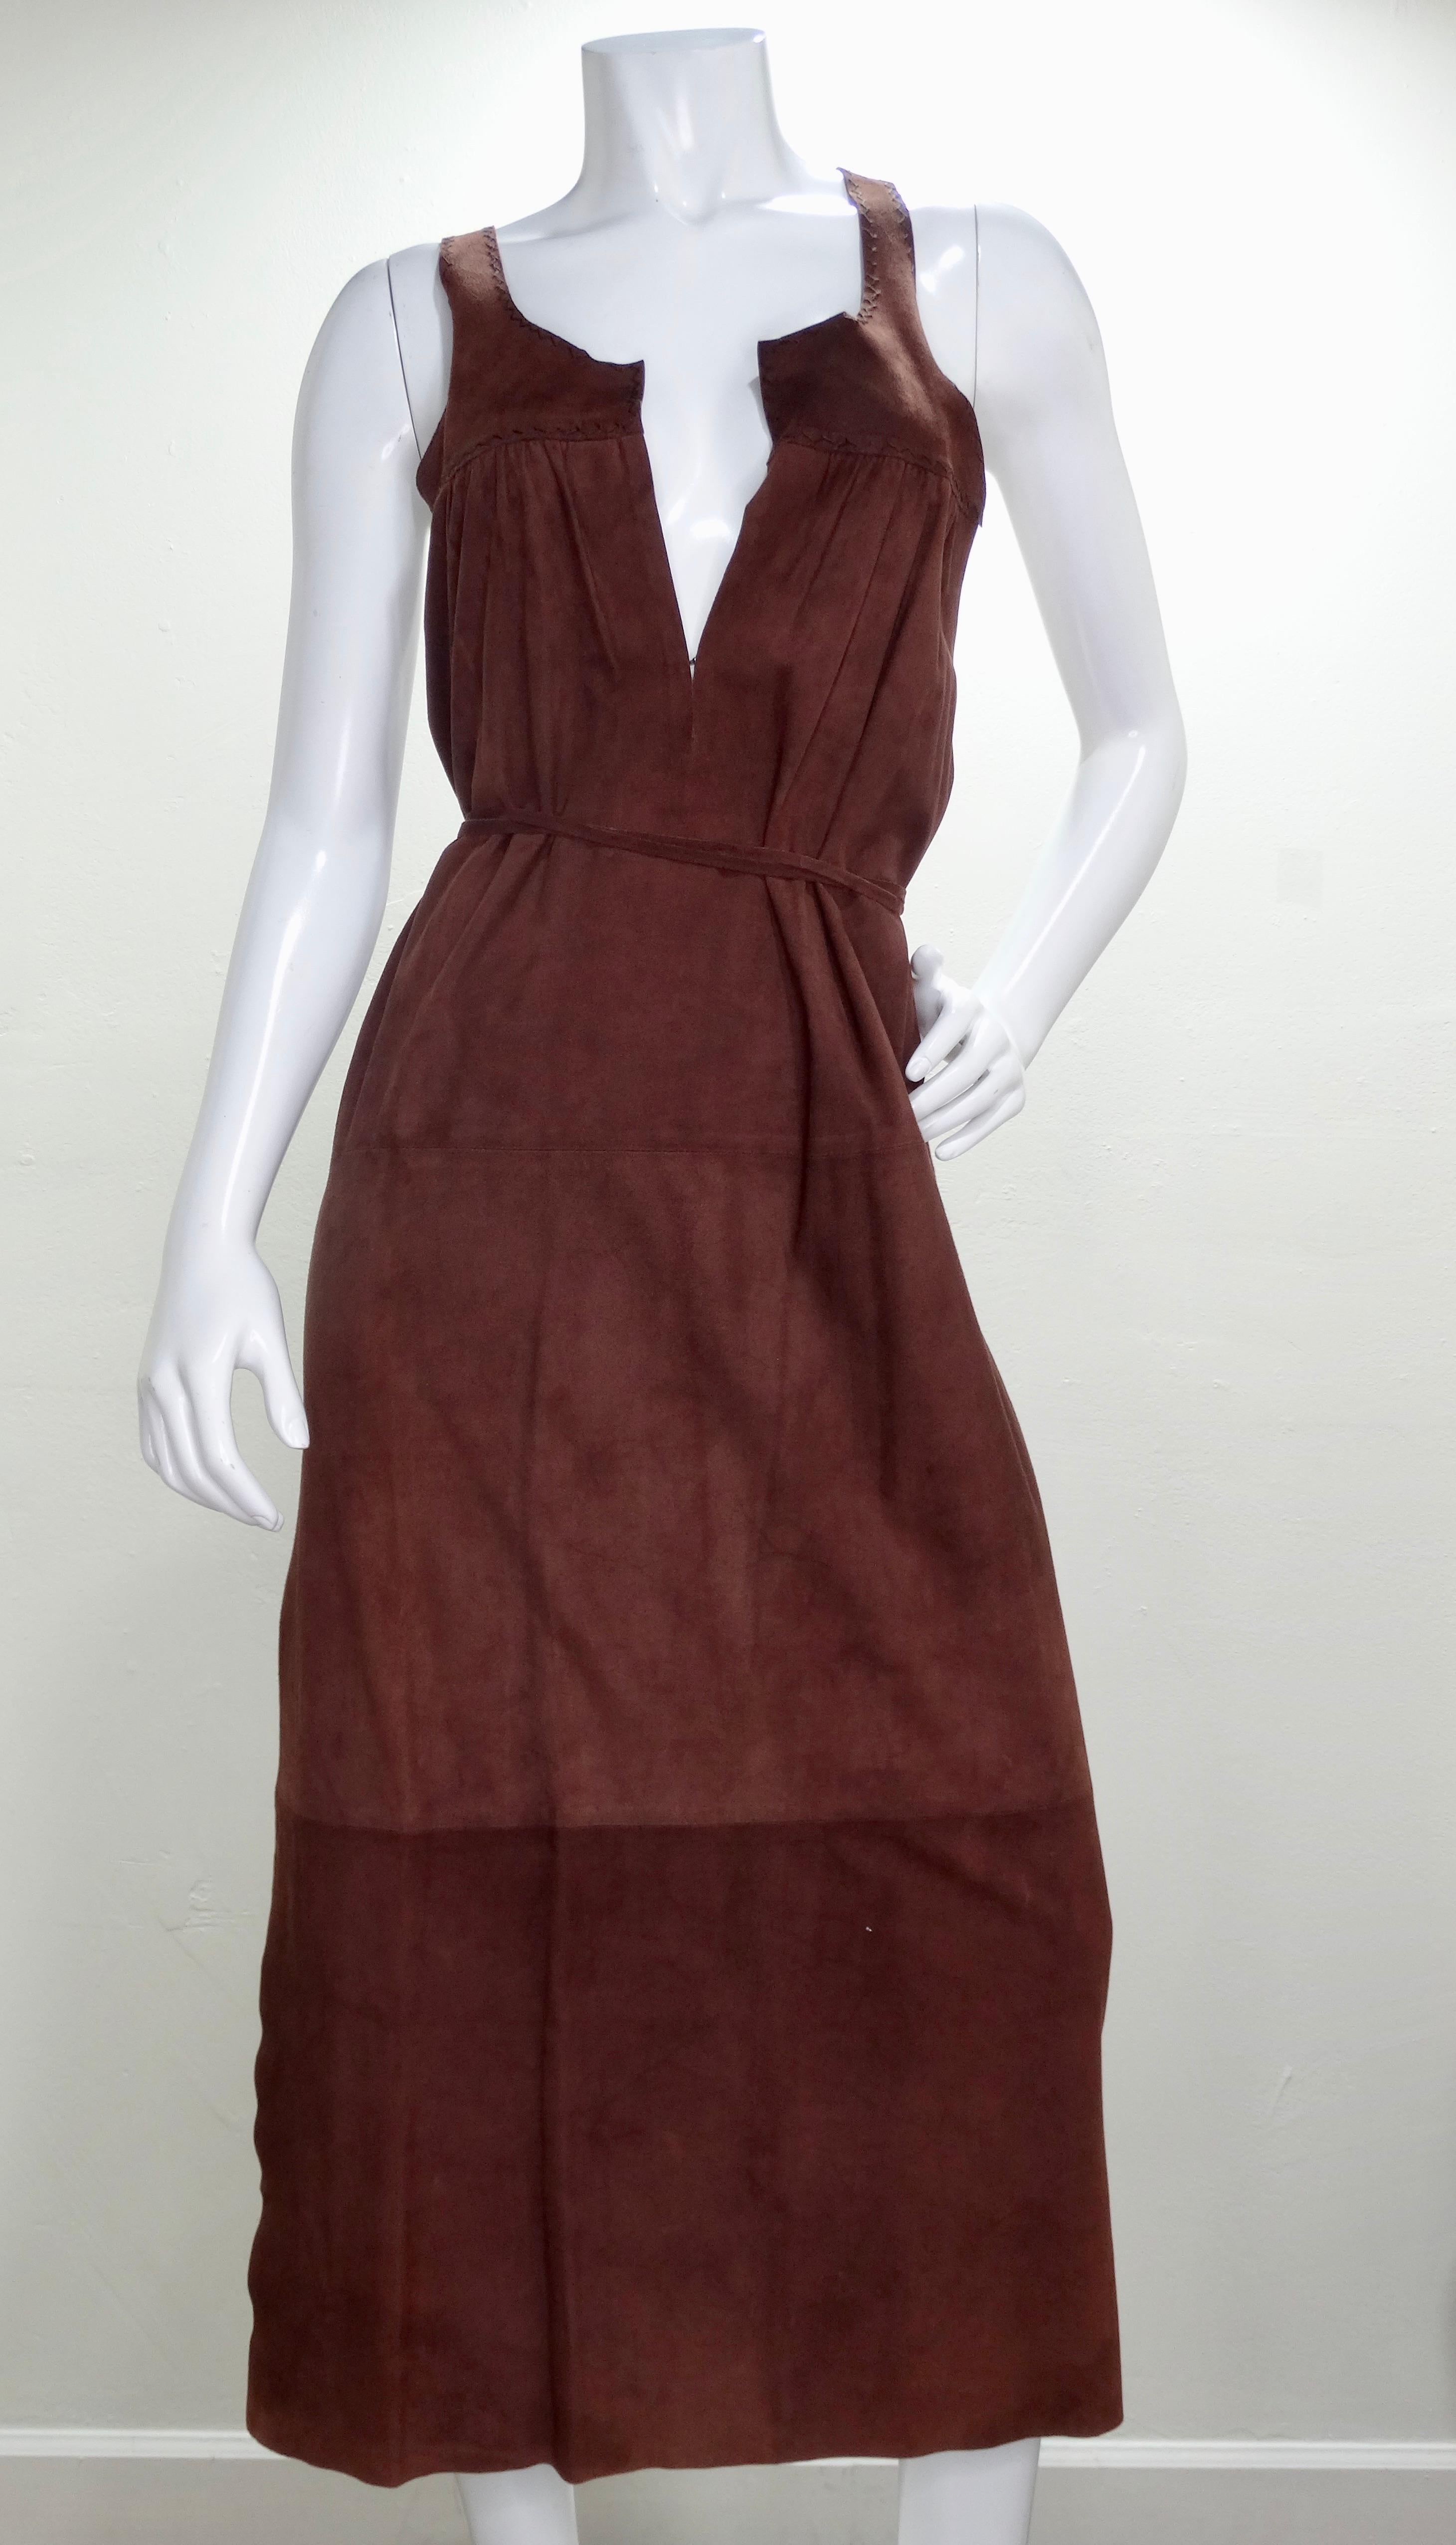 Tom Ford for Gucci 2002 Brown Suede Dress 4